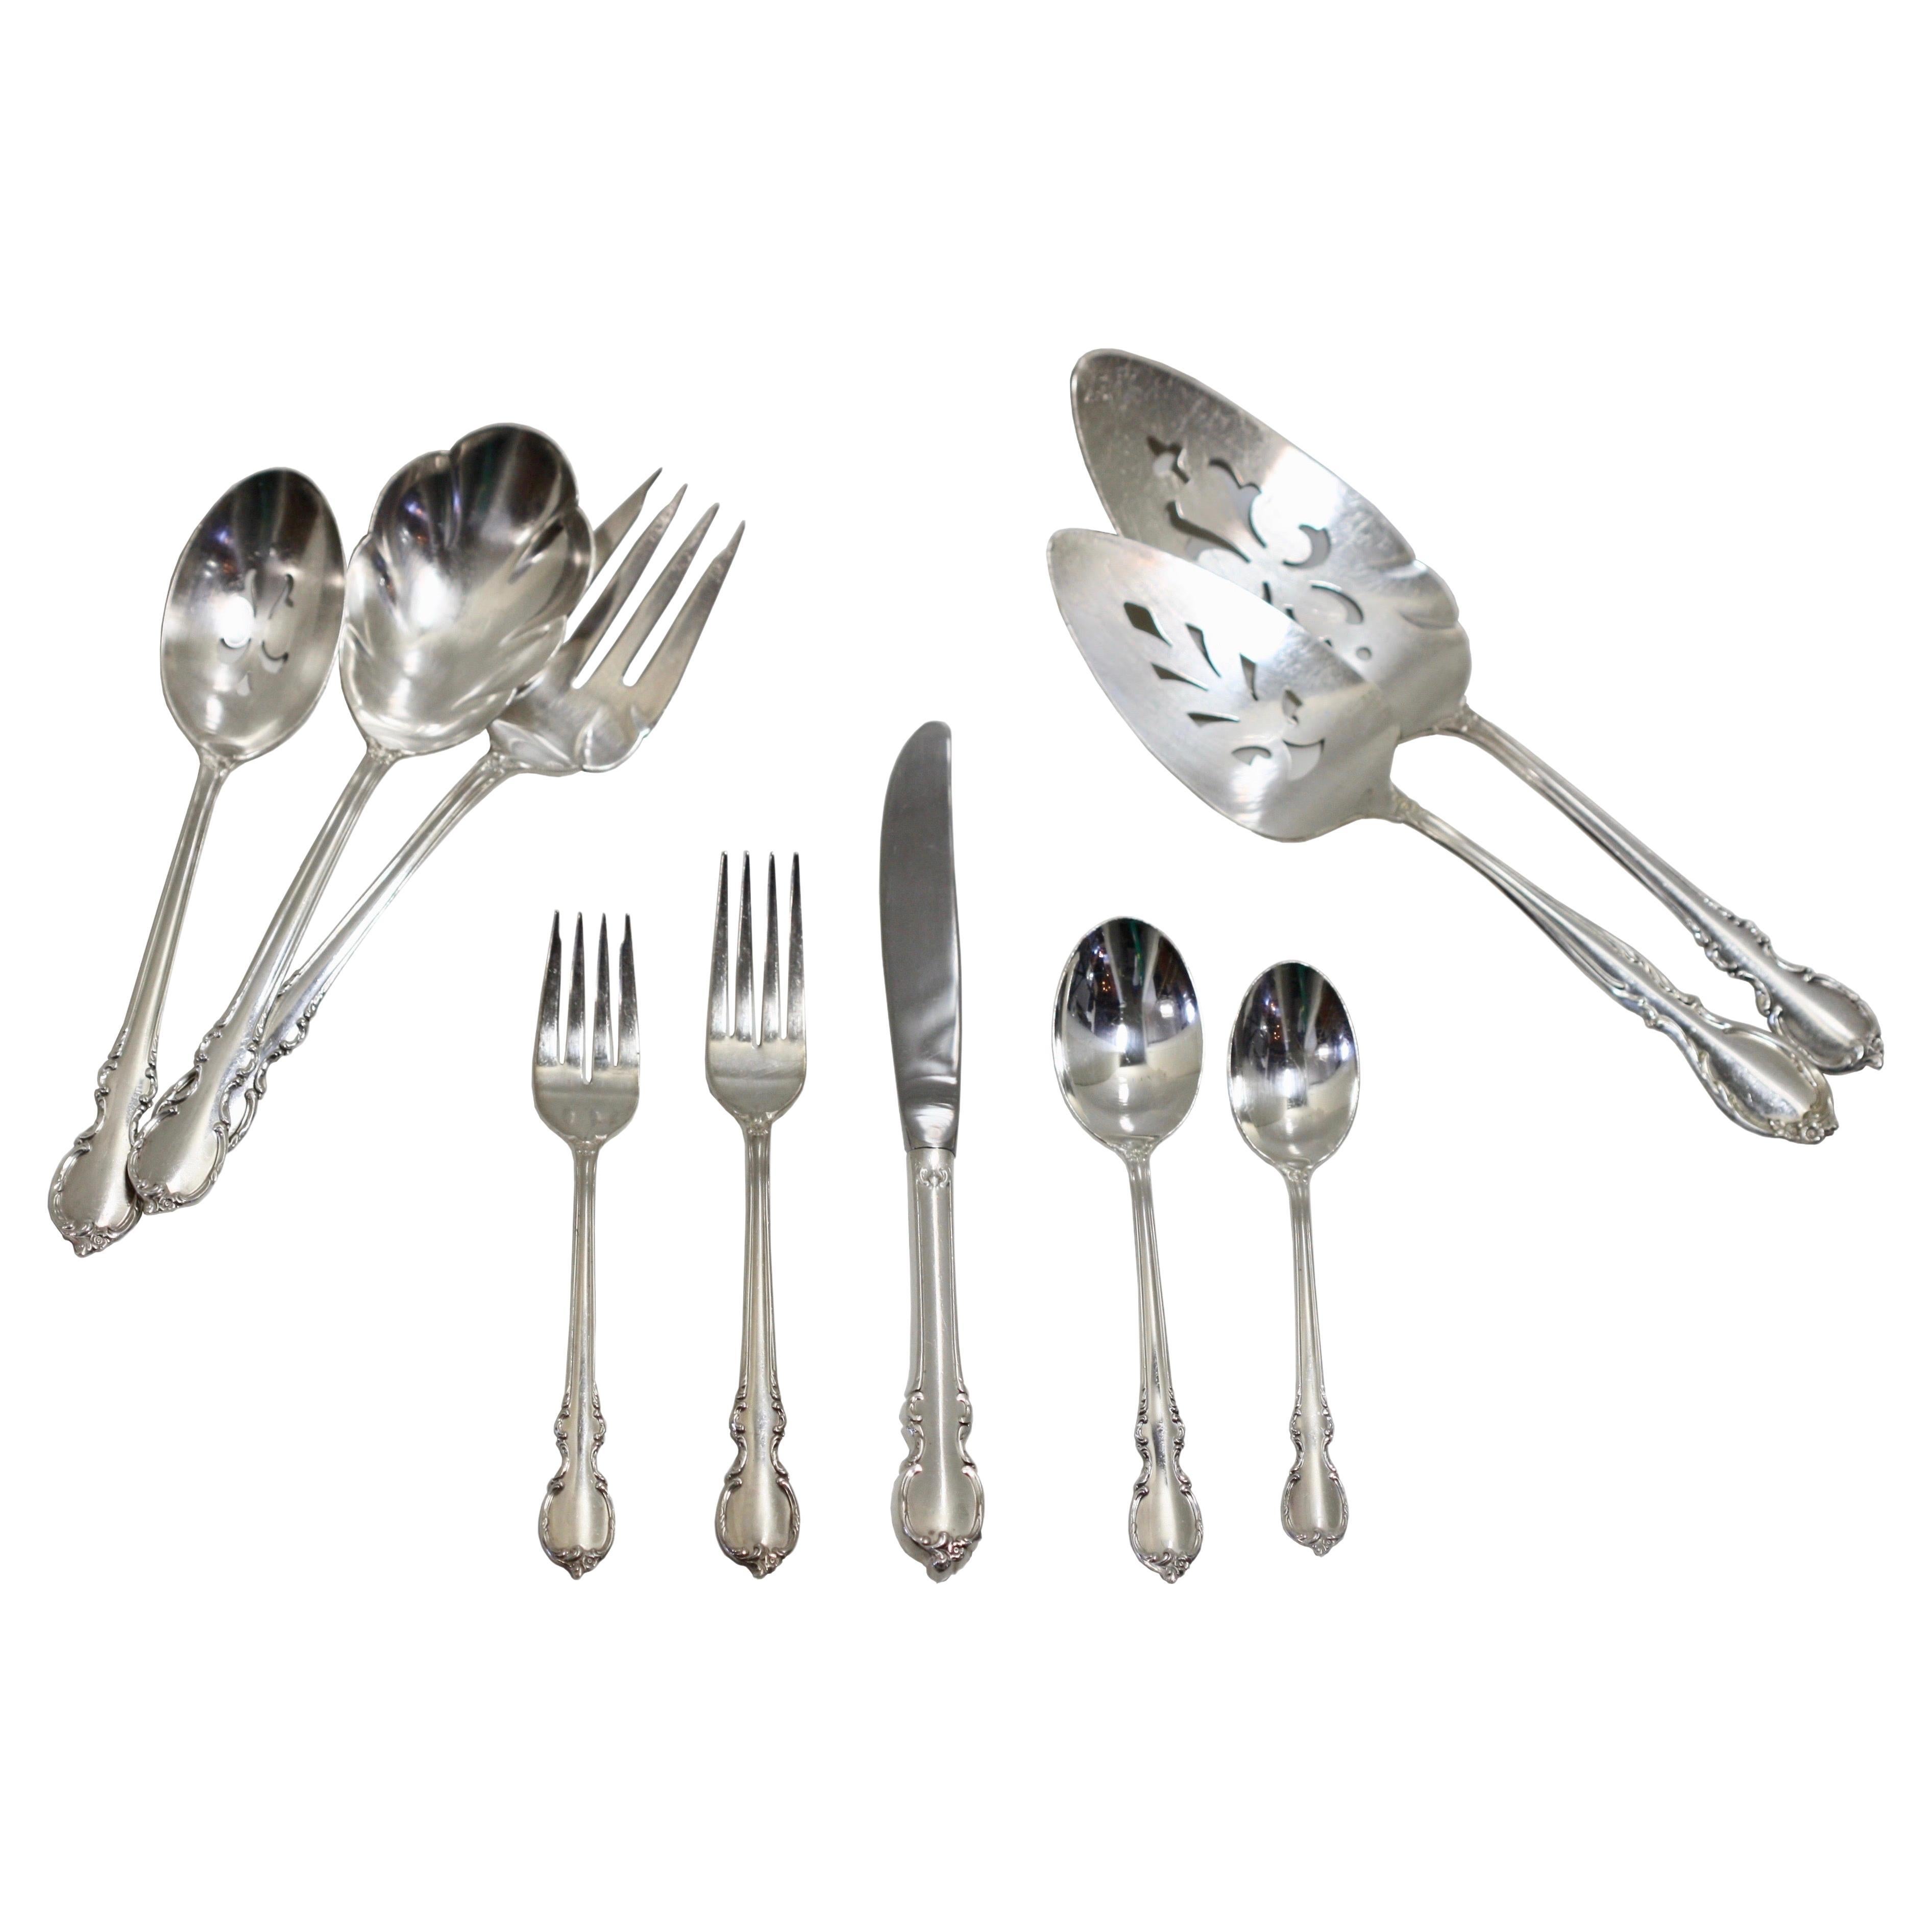  American Sterling Silver Sixty-Six Piece Part Flatware Service  For Sale